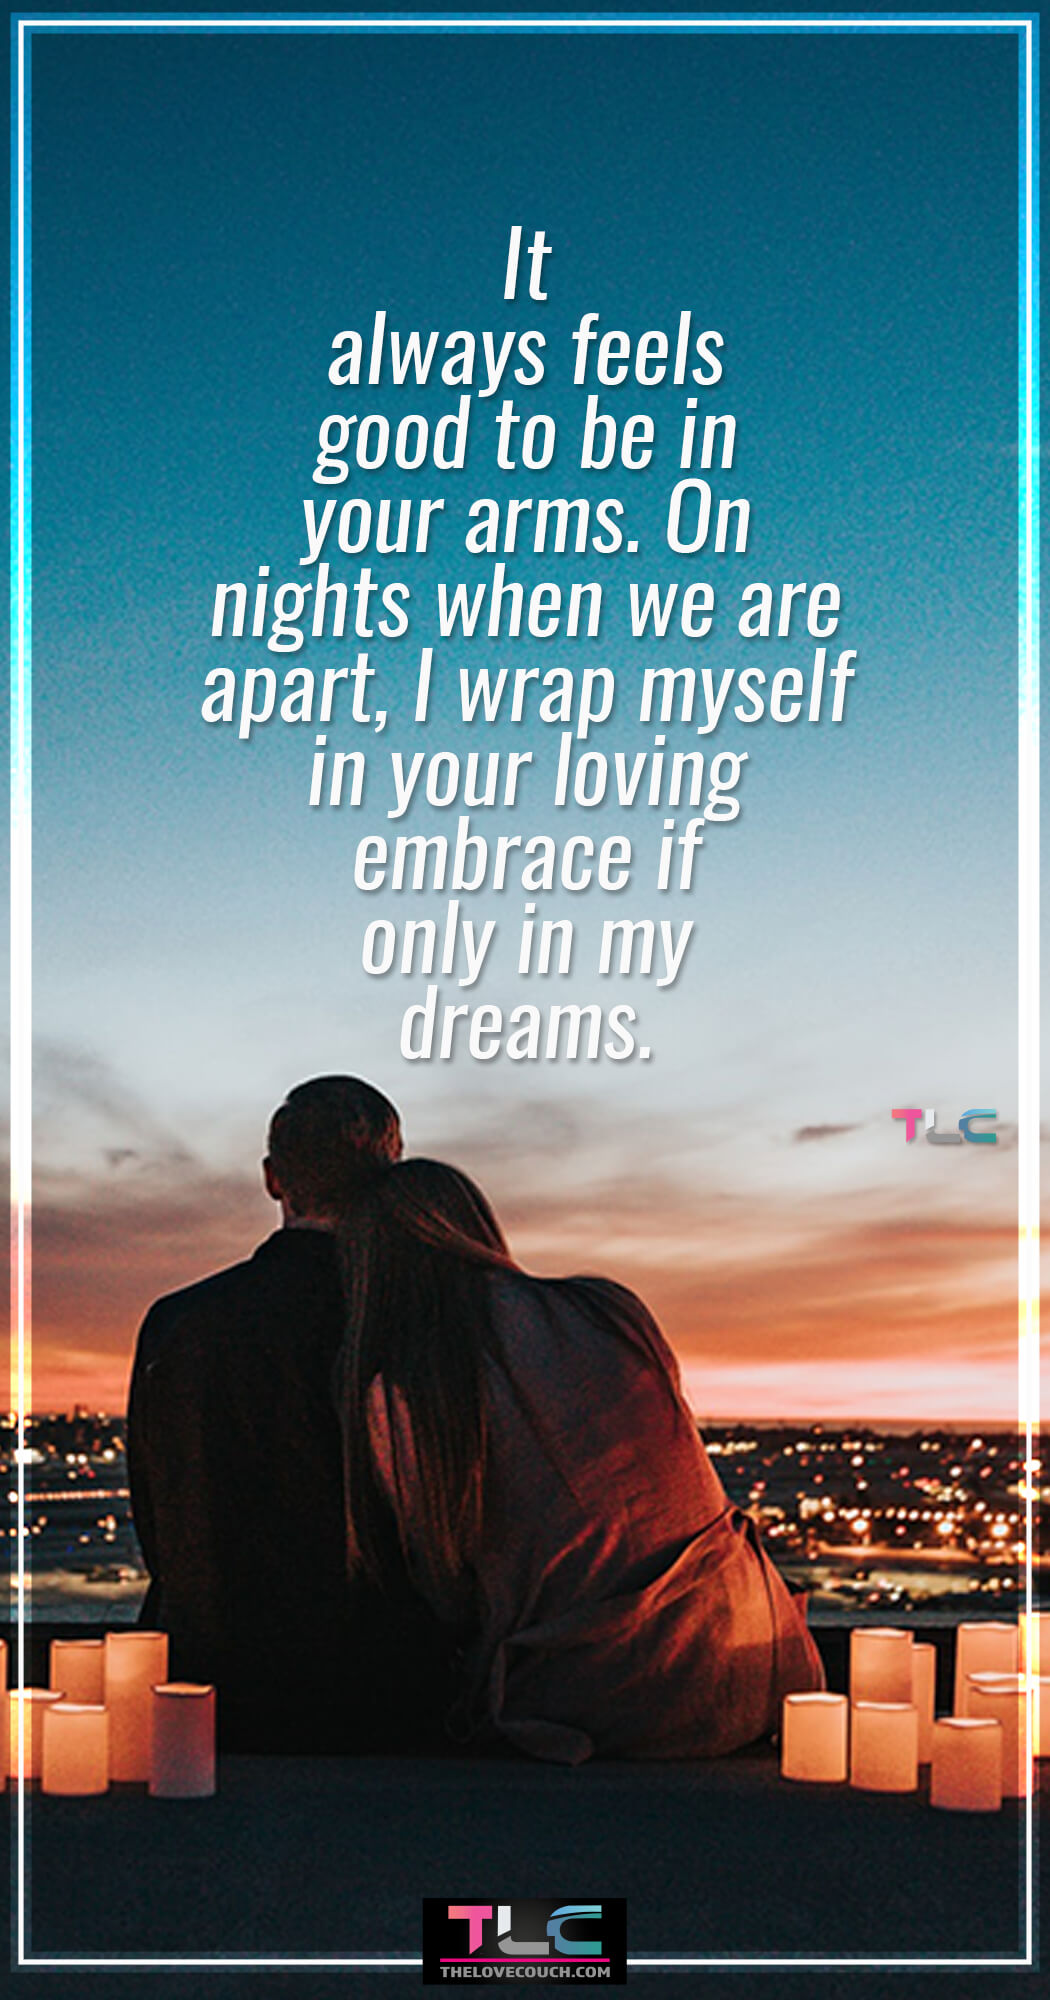 It always feels good to be in your arms. On nights when we are apart, I wrap myself in your loving embrace if only in my dreams. Want to make your husband or boyfriend think of you as he journeys into dreamland? Here are some good night love message for him to help whisk him softly into a blissful night's sleep and to dream of you all night. Also, discover more good night message for him and especially those sweet romantic good night message for him to make him go crazy over you.